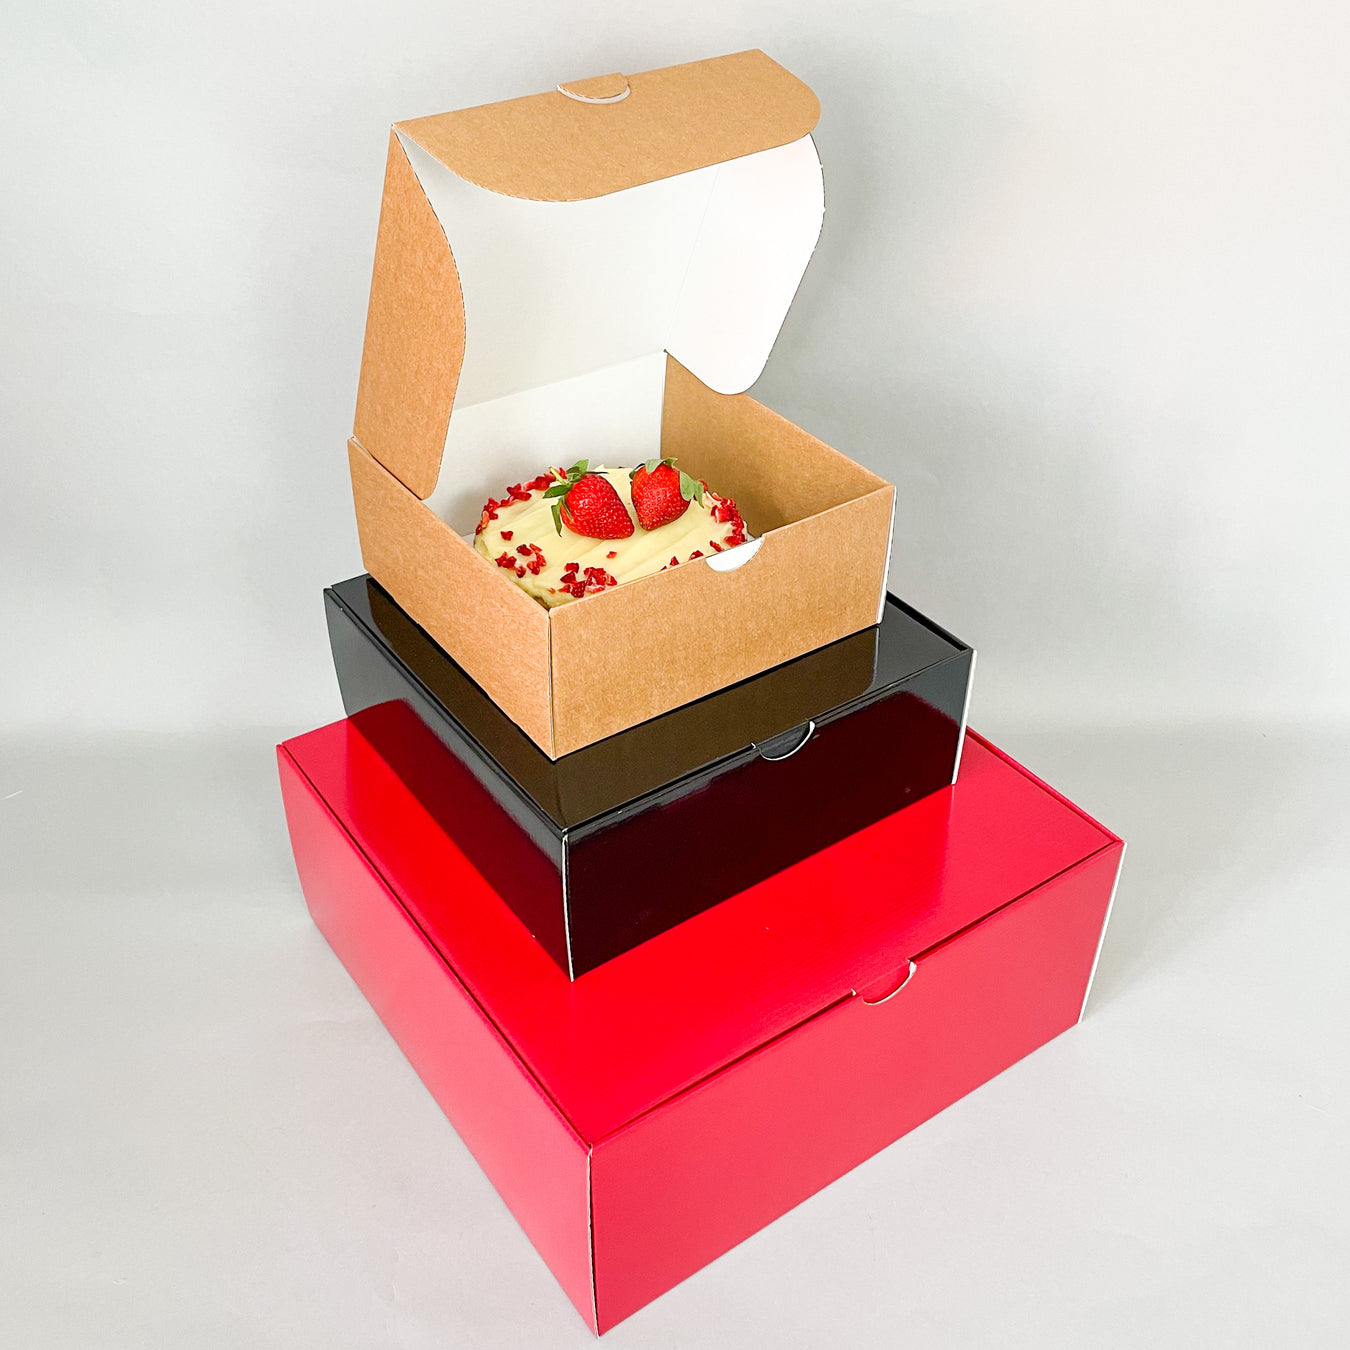 Cake Delivery & Treat Boxes